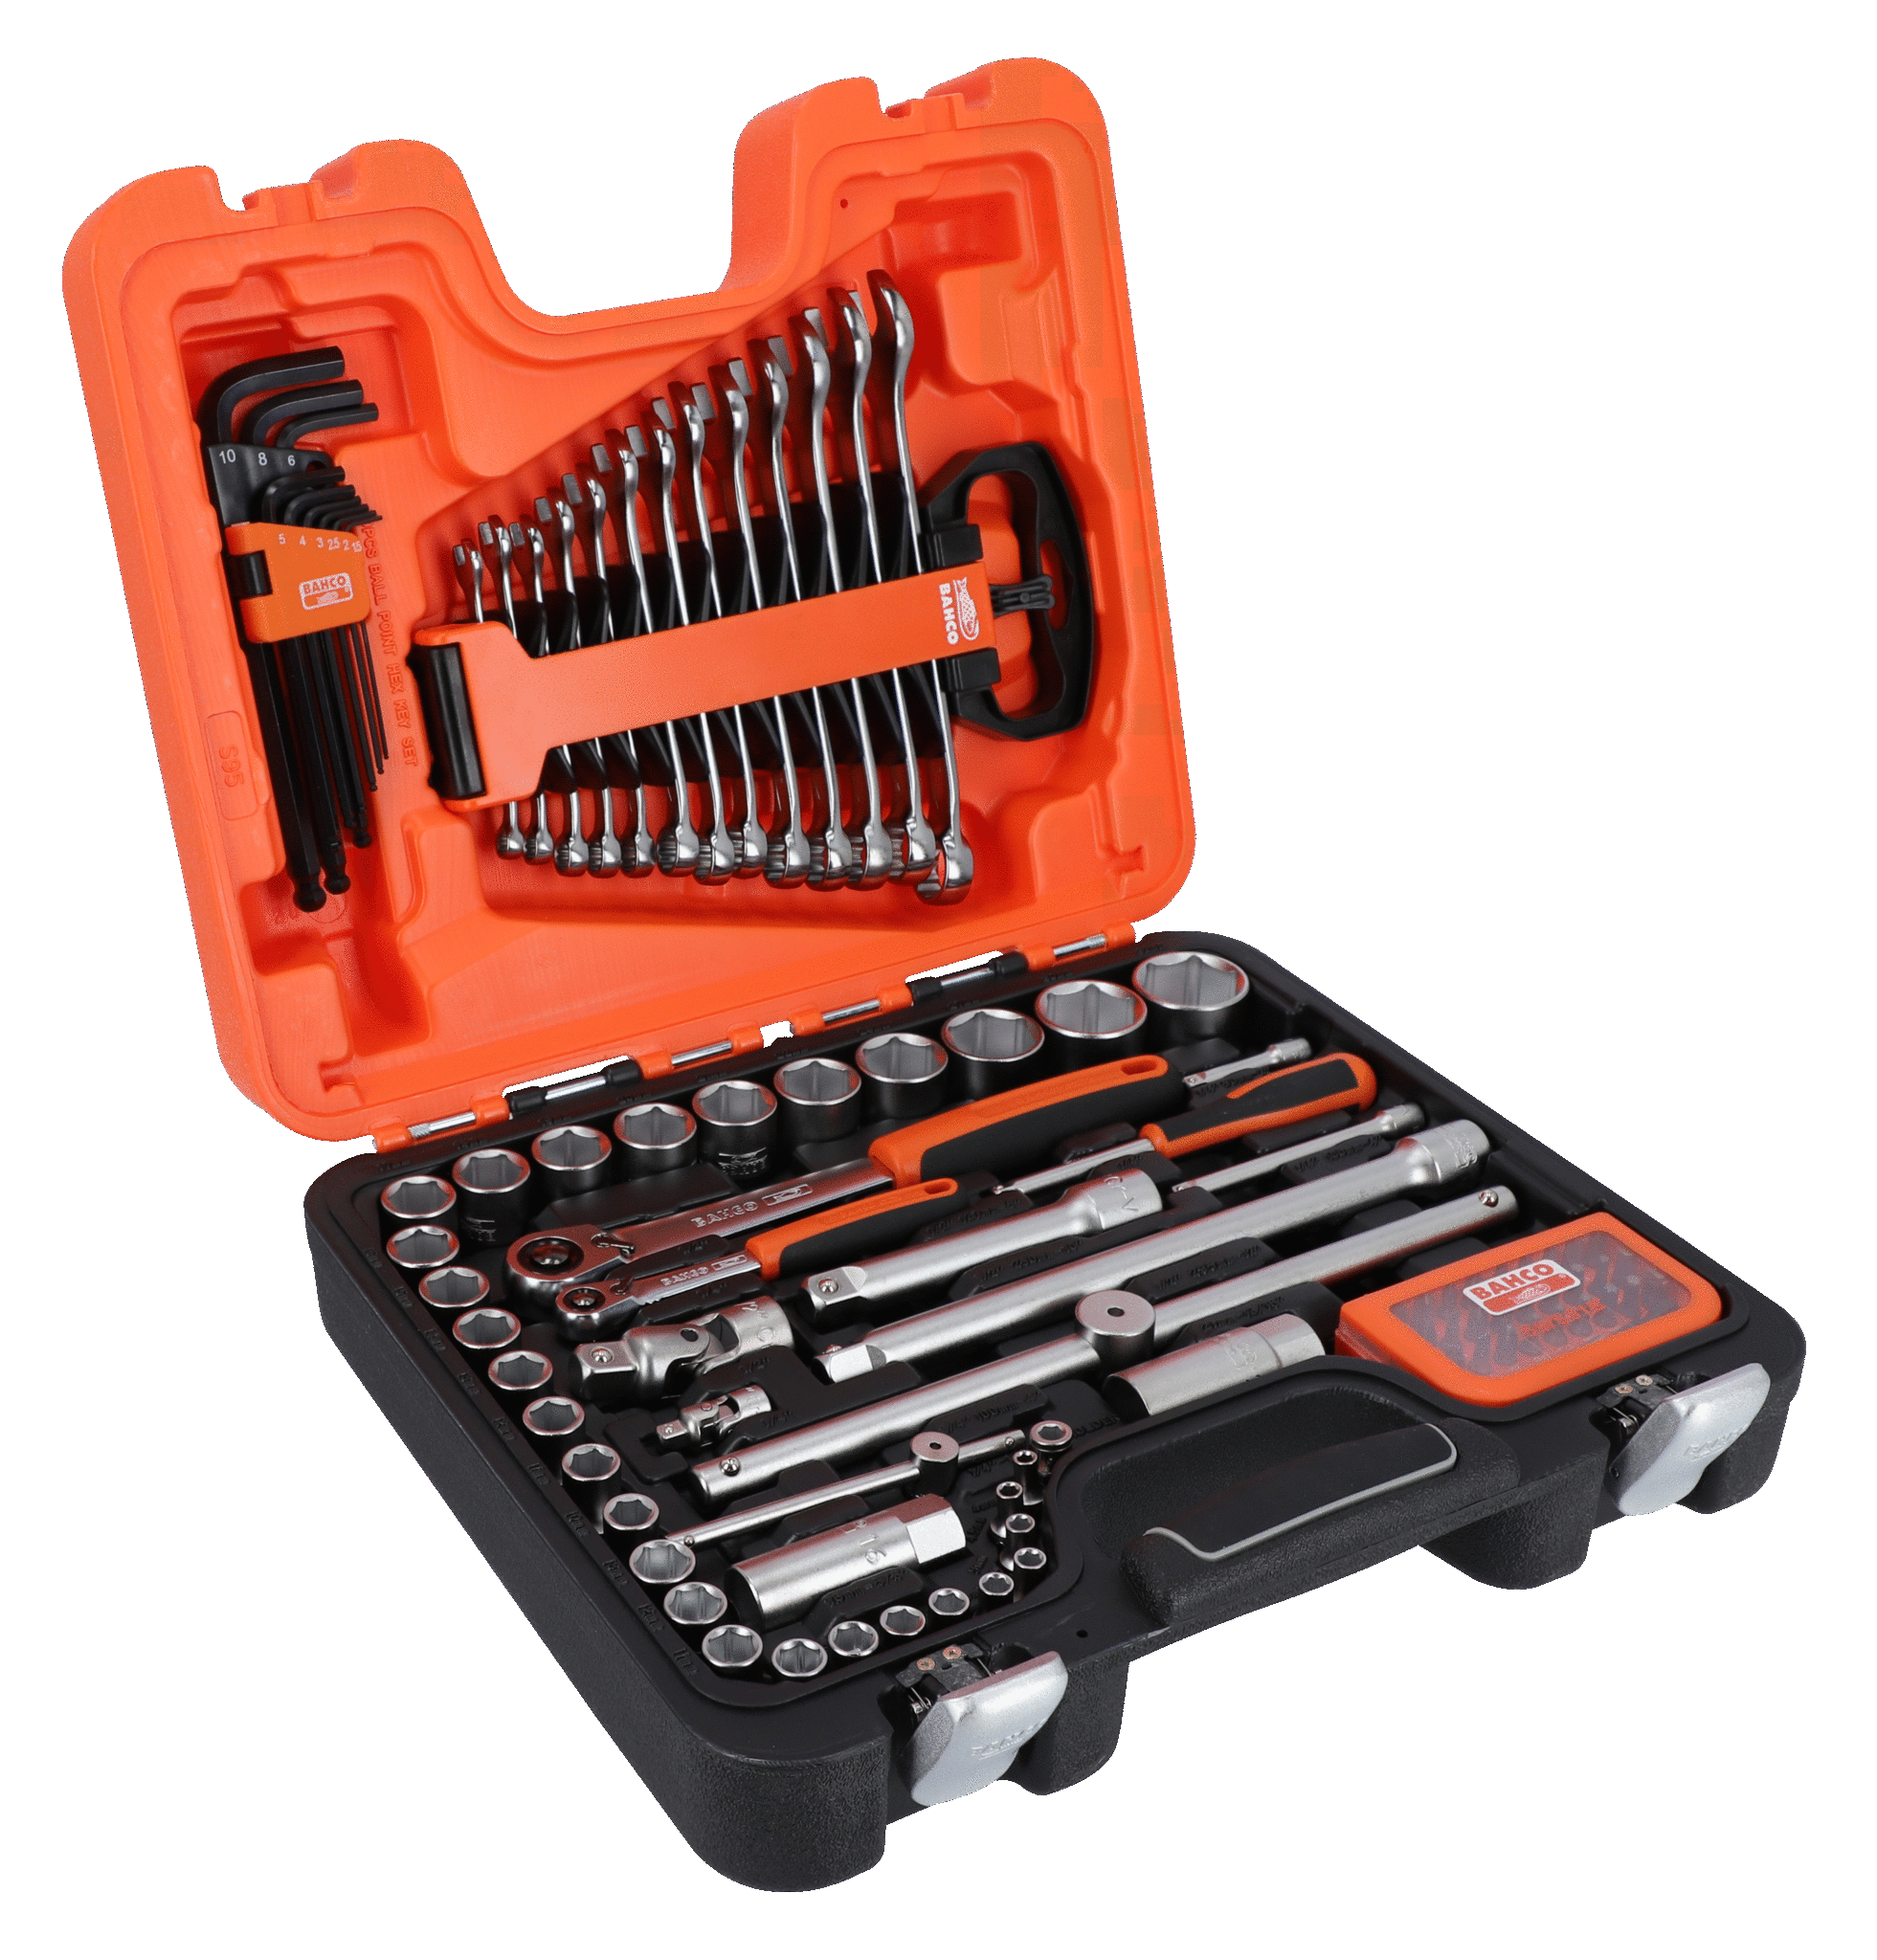 BAHCO S95 Socket Set Combination Wrench, Hex L-Keys Bits - 95 Pcs - Premium Socket set from BAHCO - Shop now at Yew Aik.